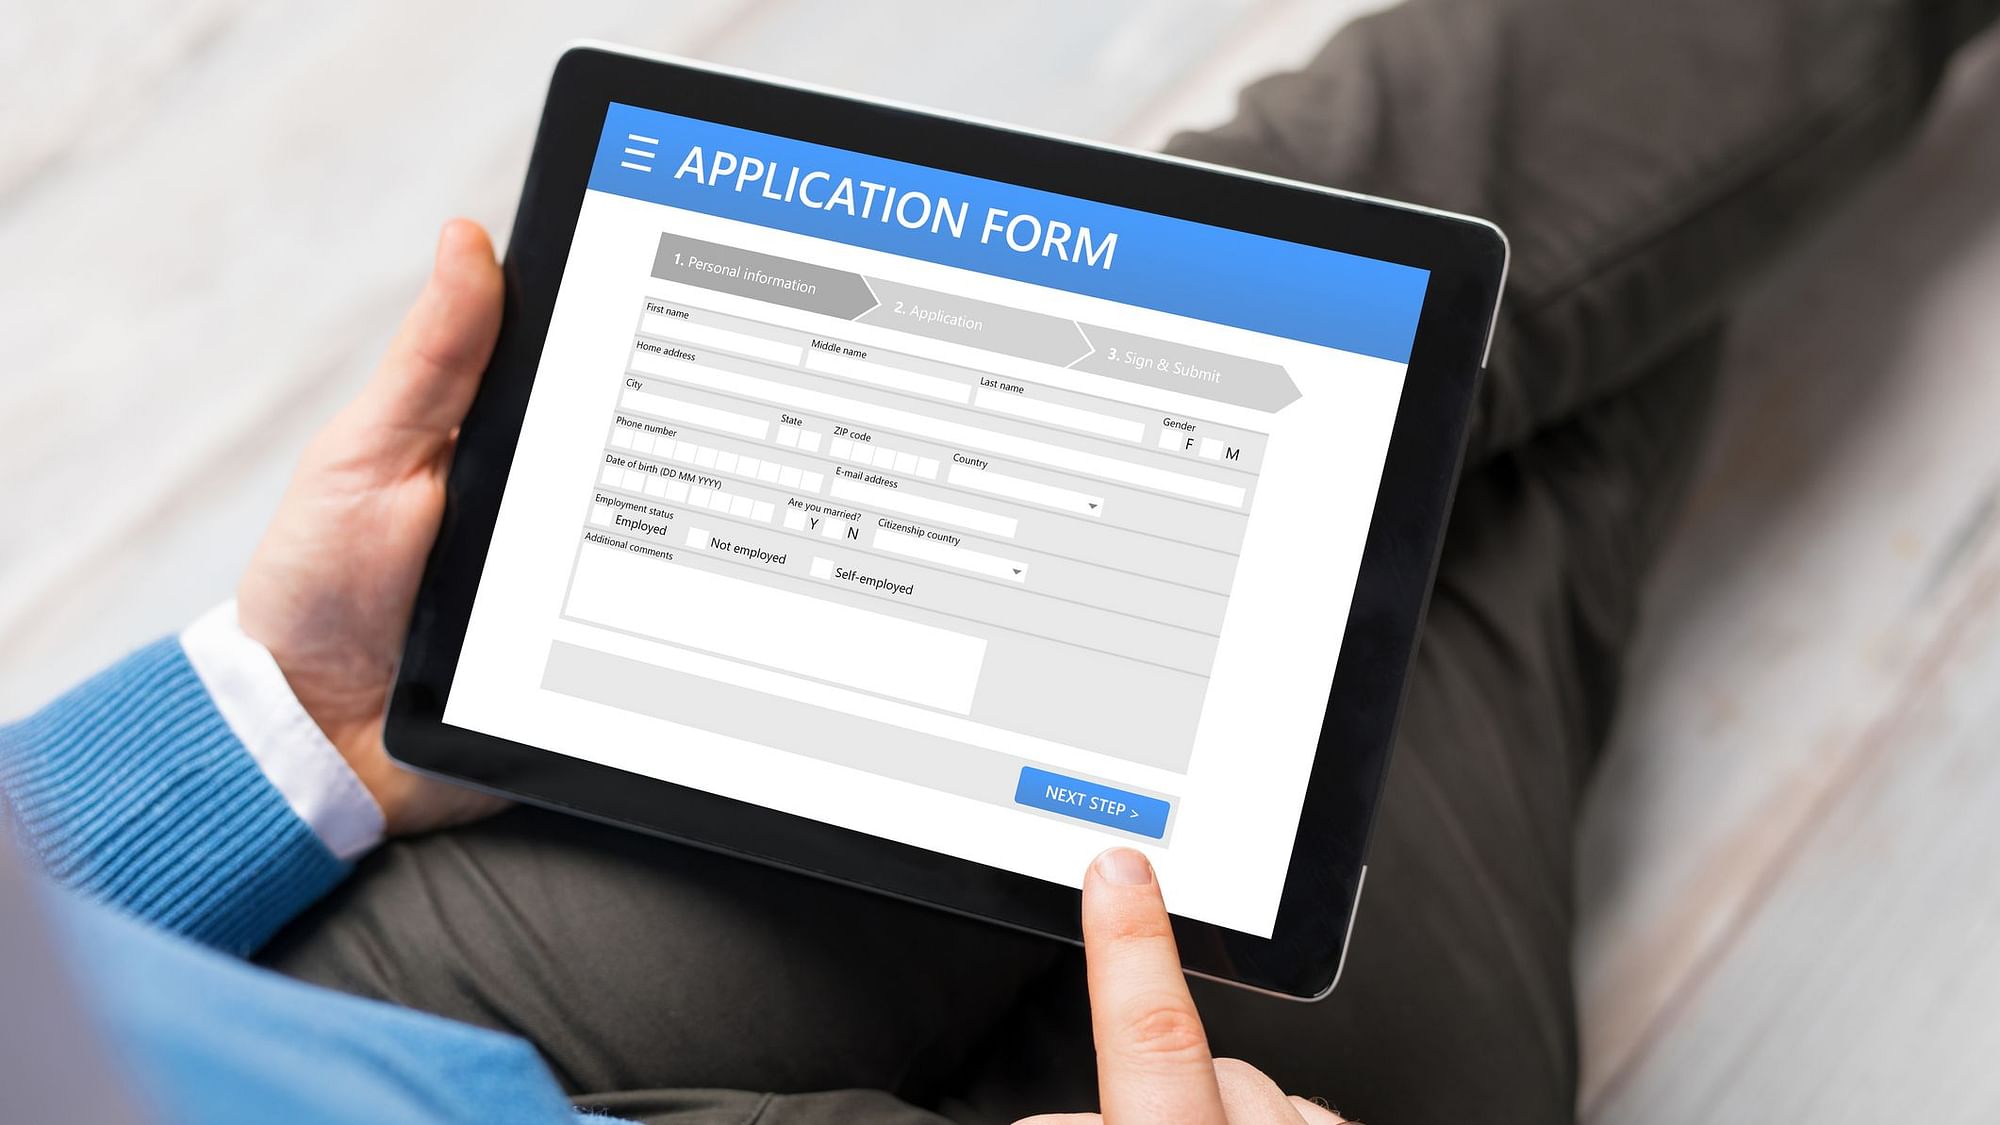 Check how to fill the offline application form for NEET-UG 2020 exam for J & K candidates